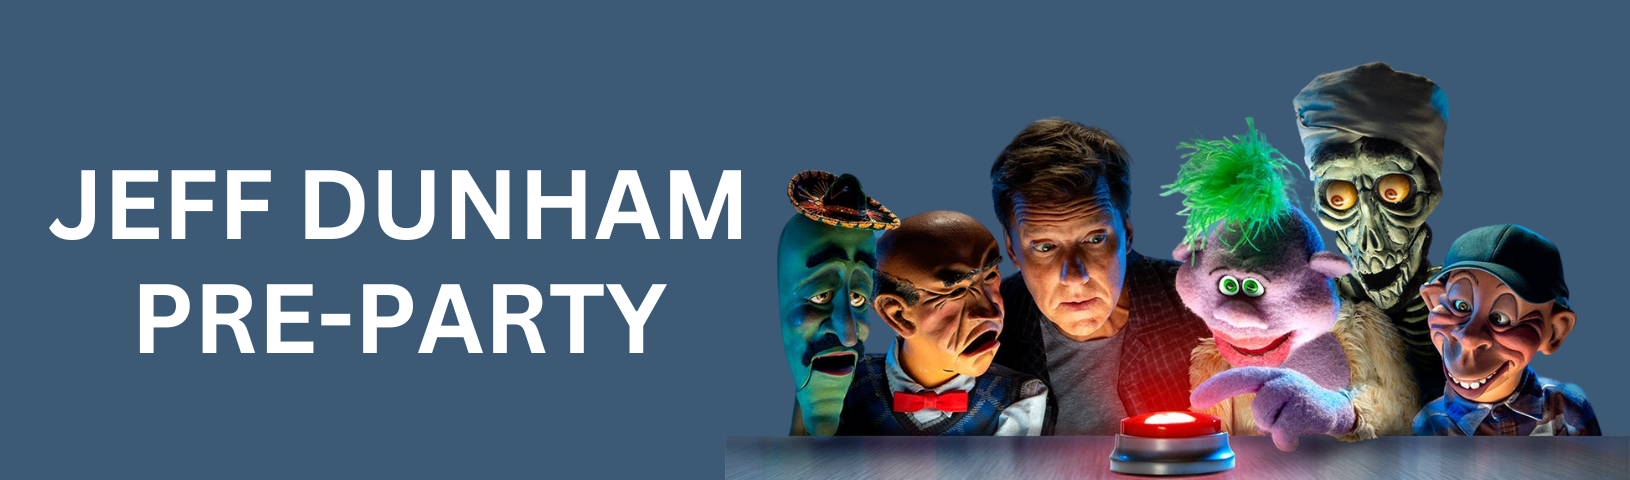 JEFF DUNHAM PRE-PARTY Background Image